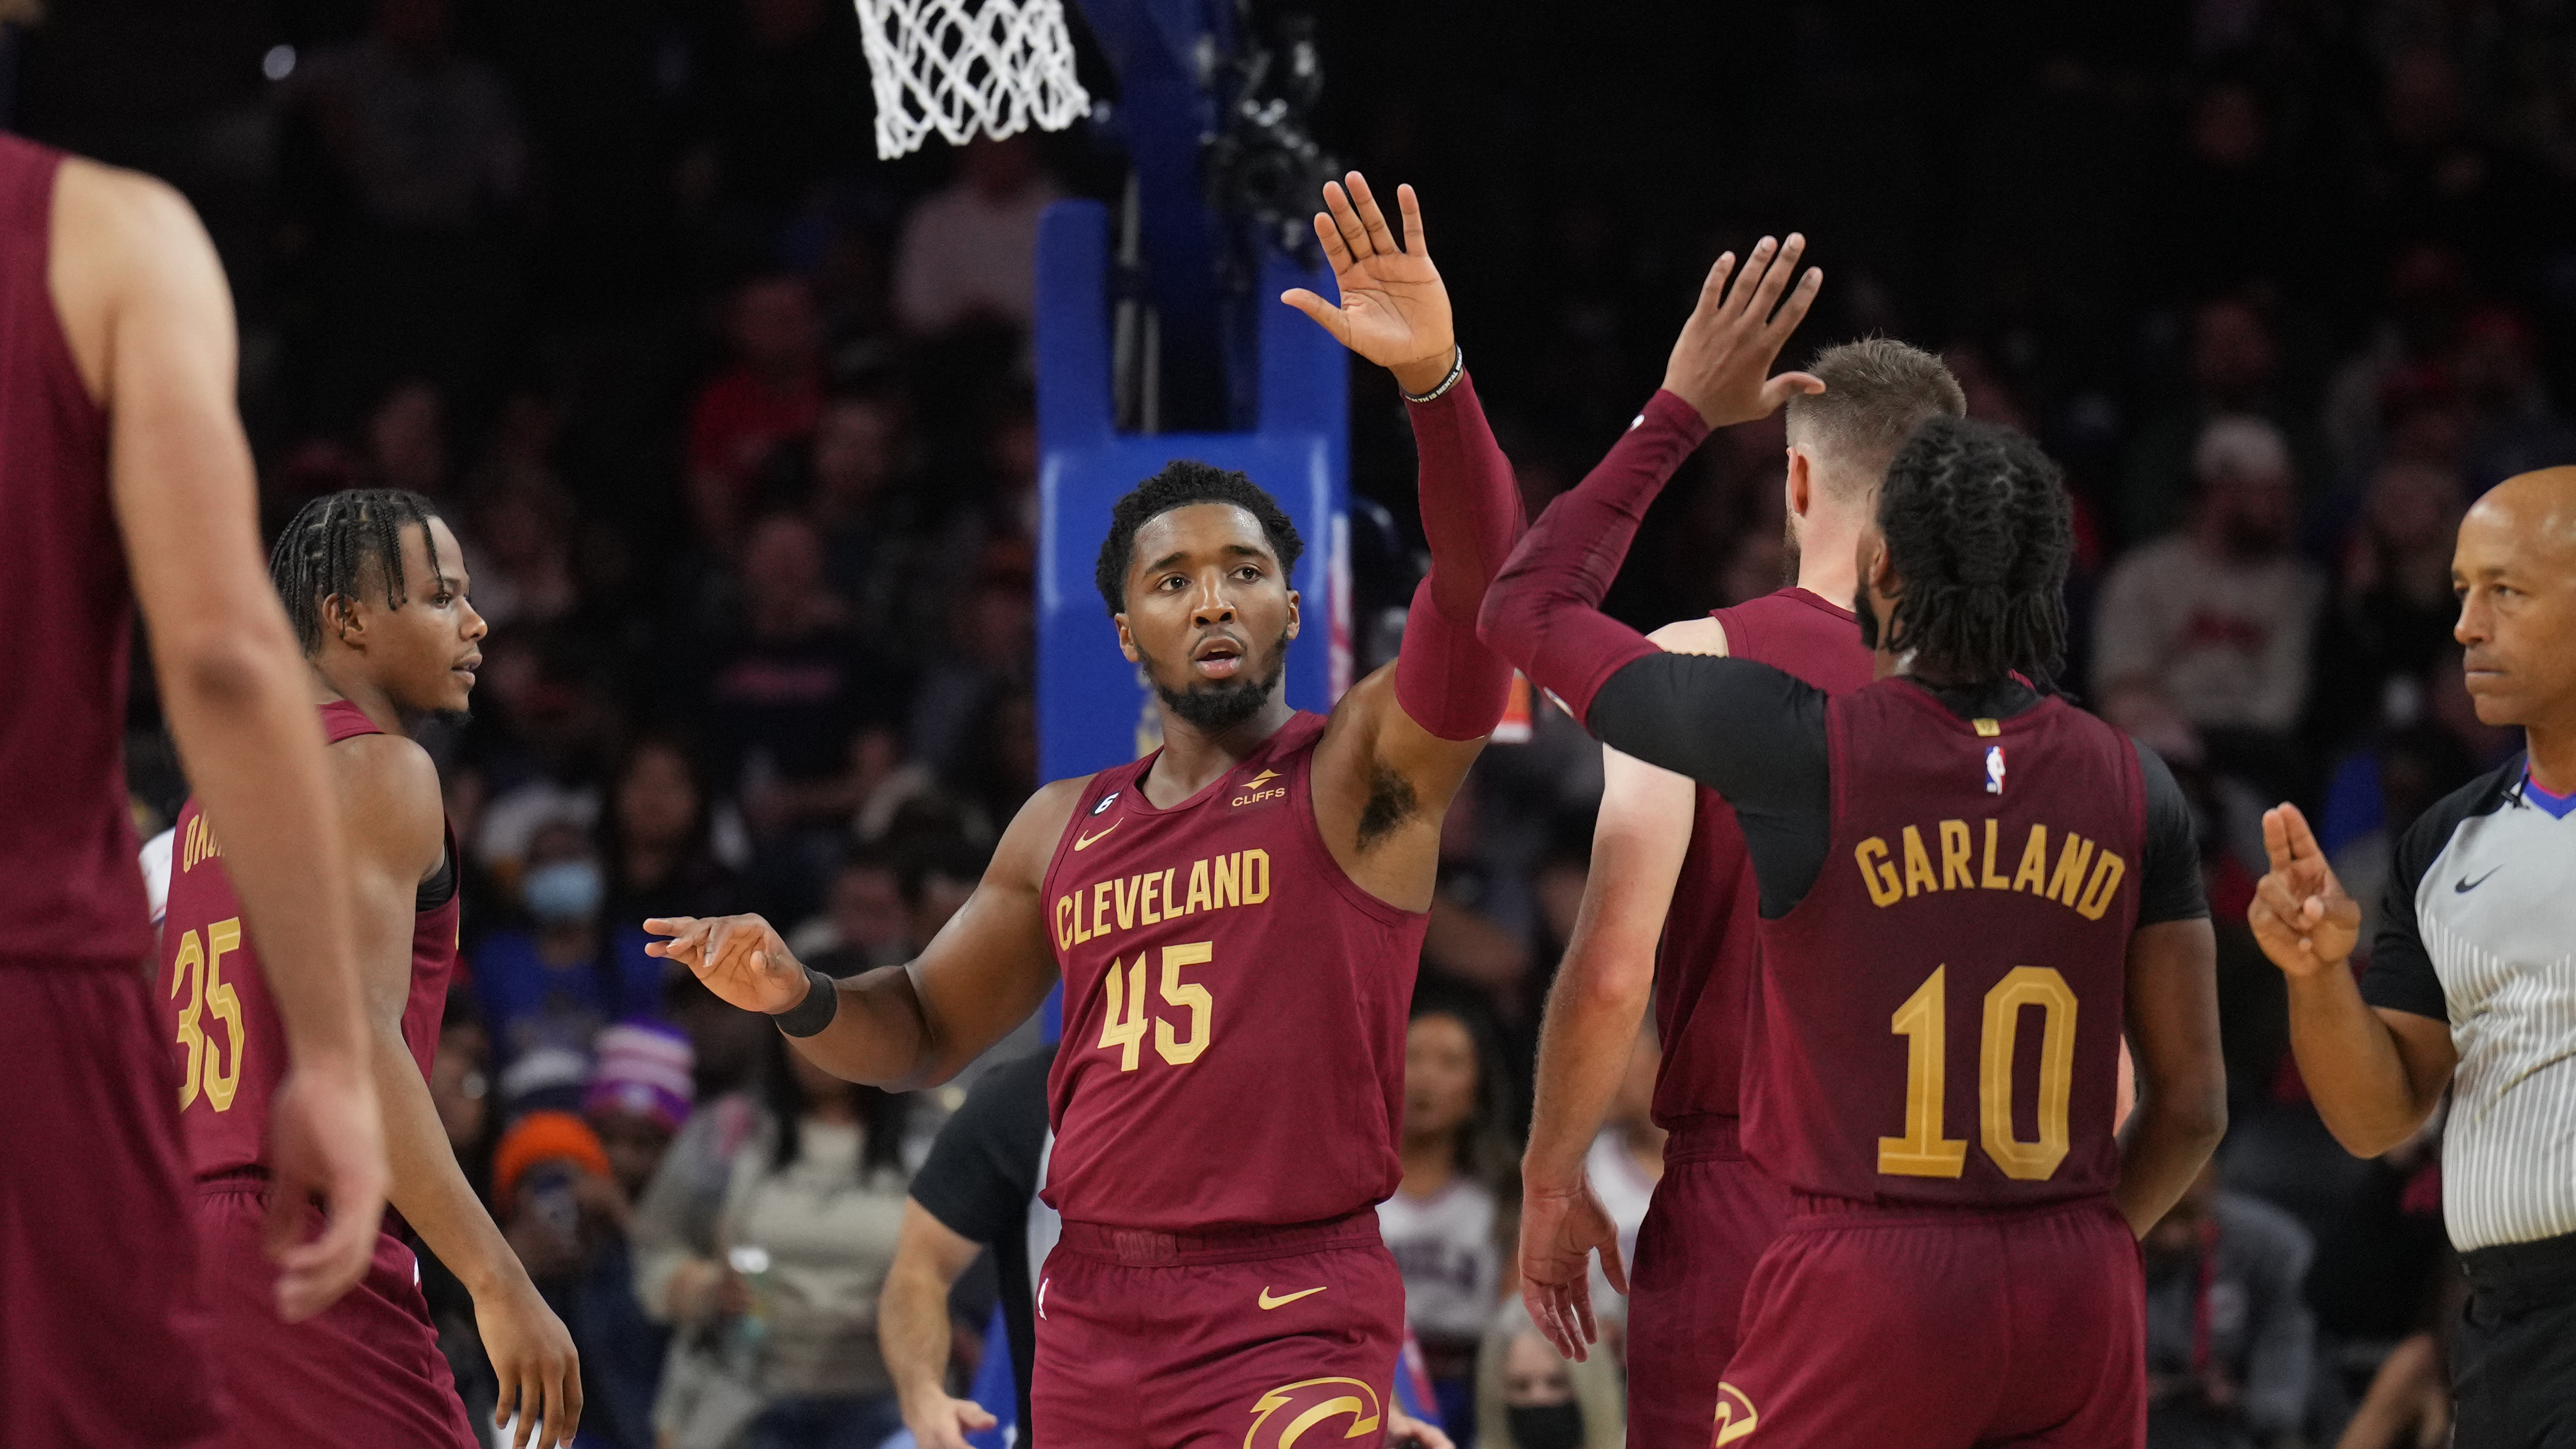 Donovan Mitchell and Darius Garland playing for the Cavs